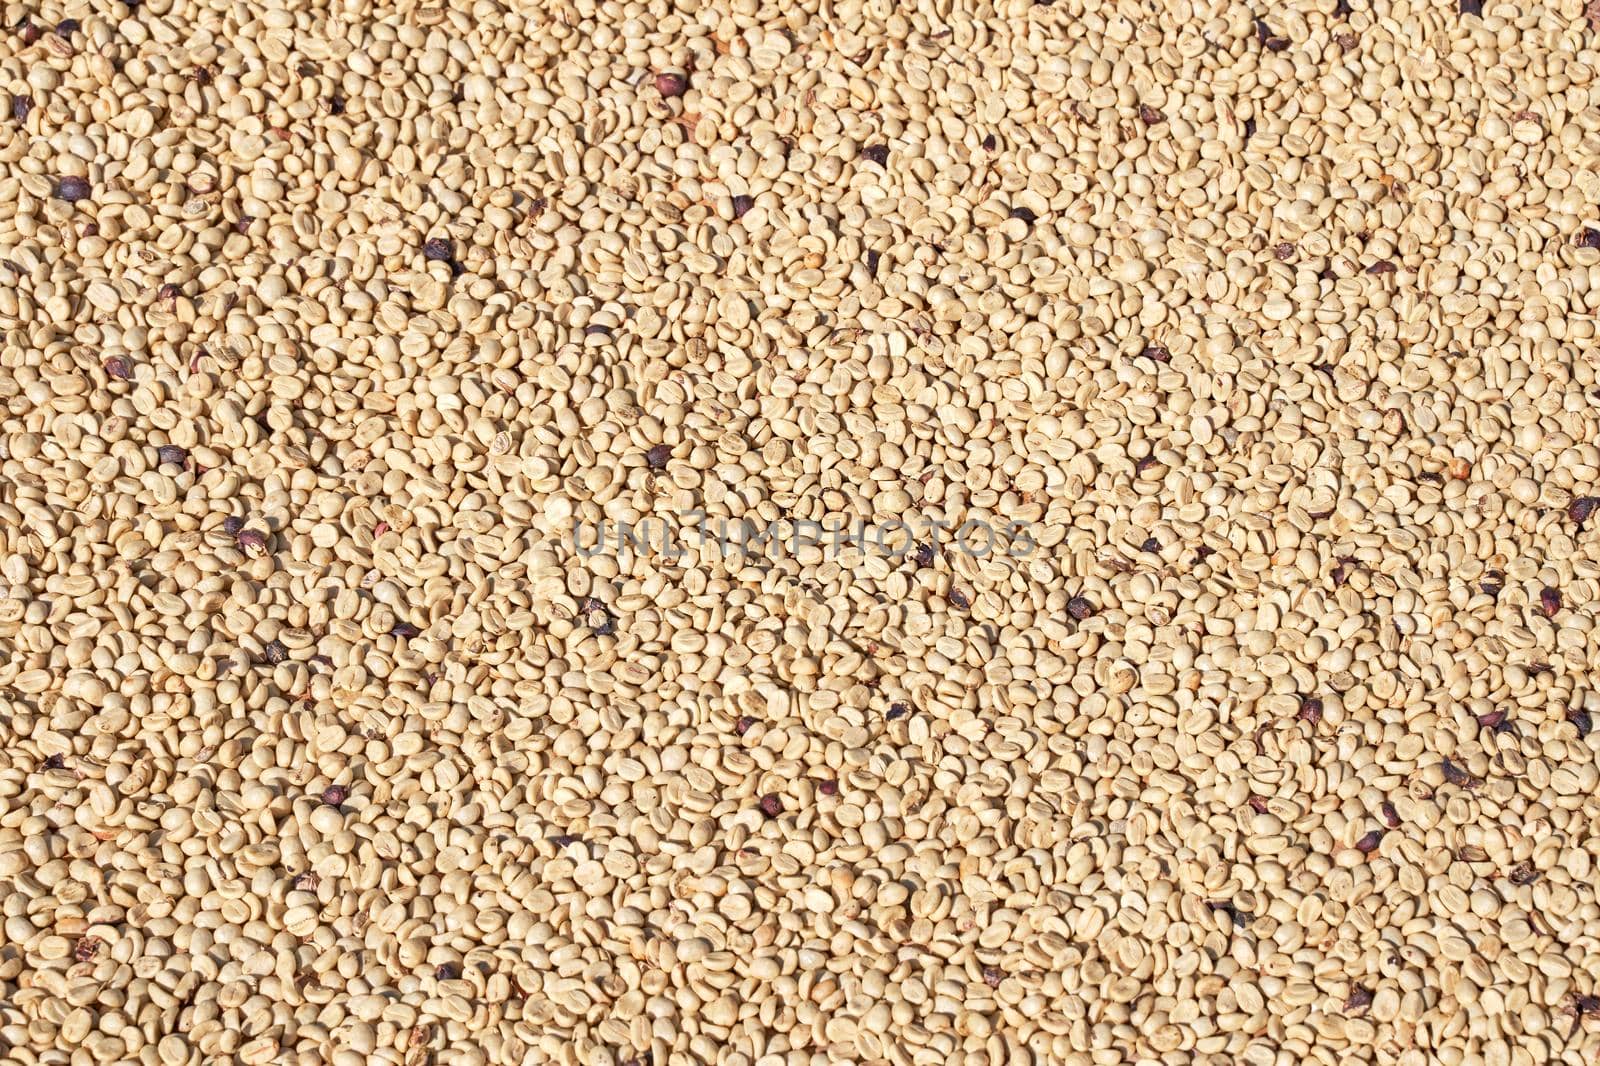 Raw coffee beans natural exposured with sunlight on a sieve outside the procedure factory before roasting process, close up, real life, lifestyle.